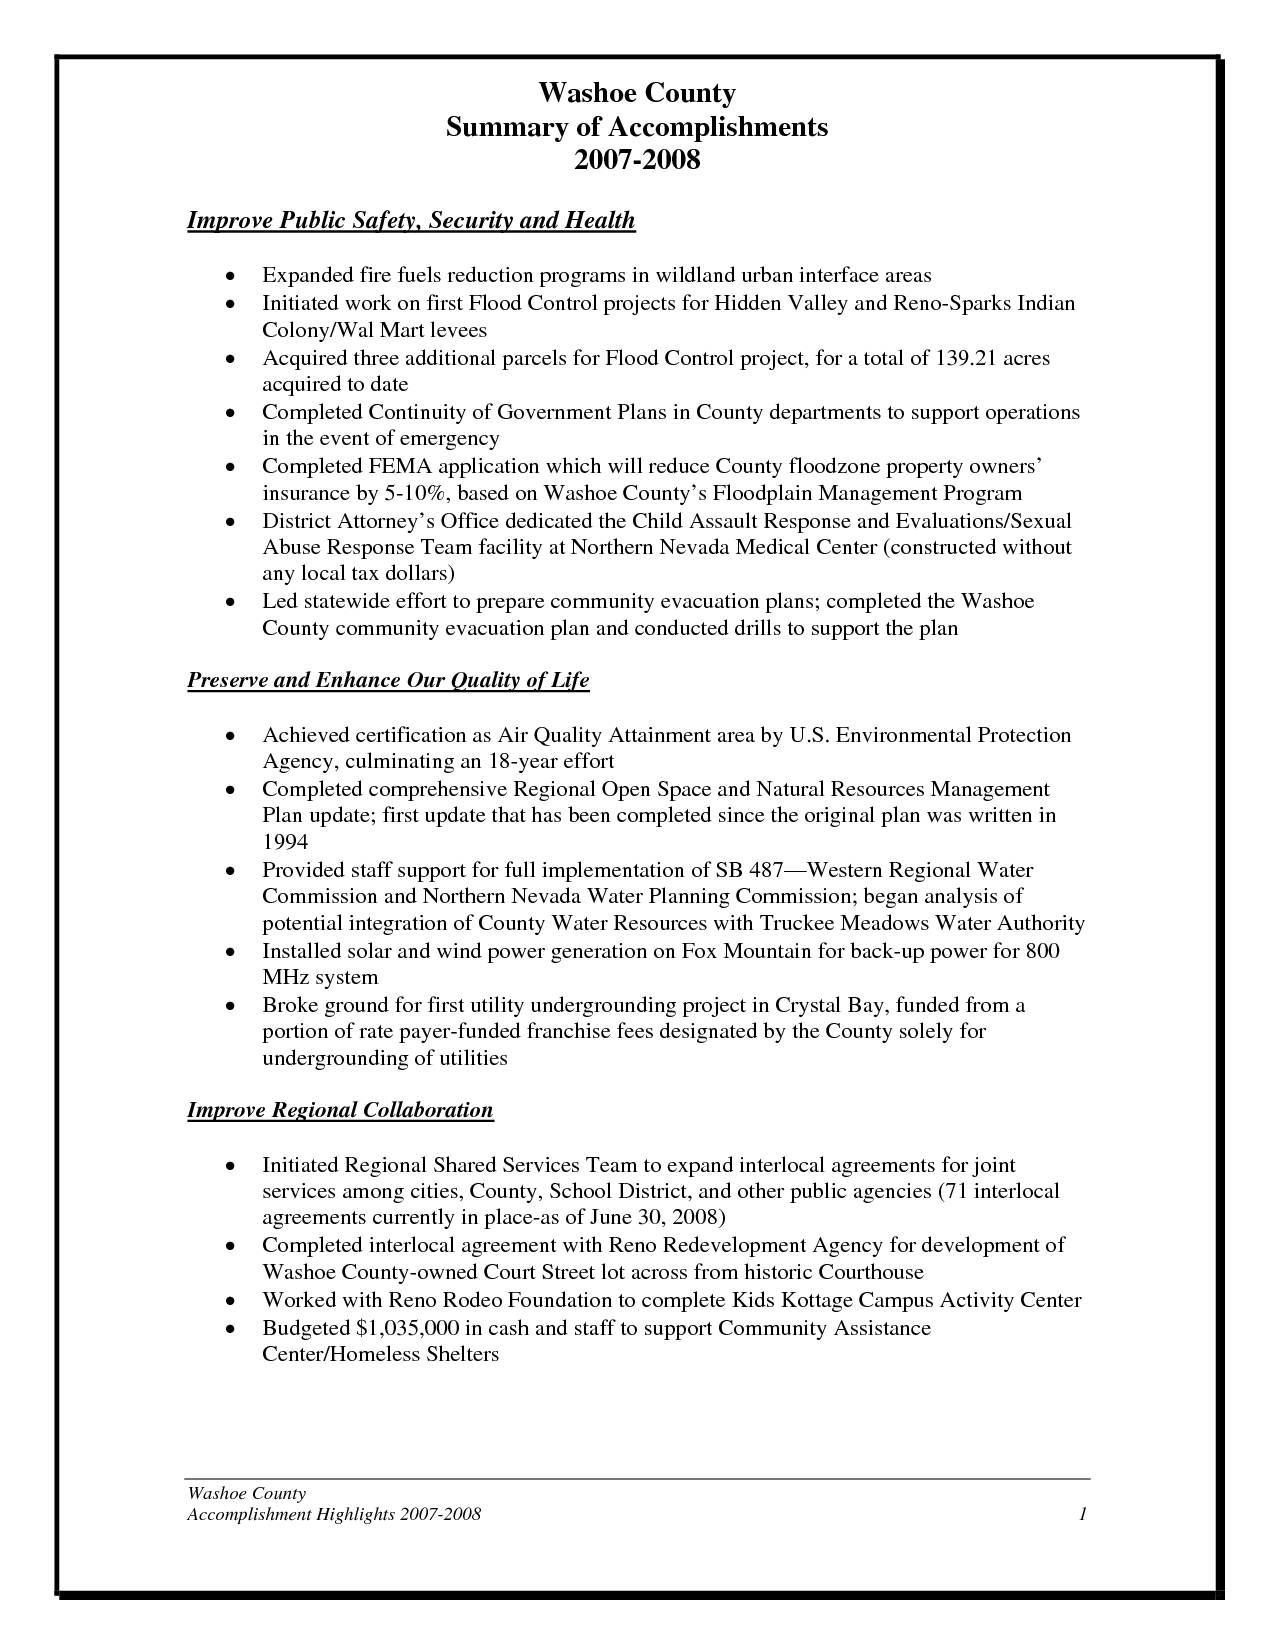 Exceptional Annual Accomplishment Report Summary Sample For Intended For Summary Annual Report Template